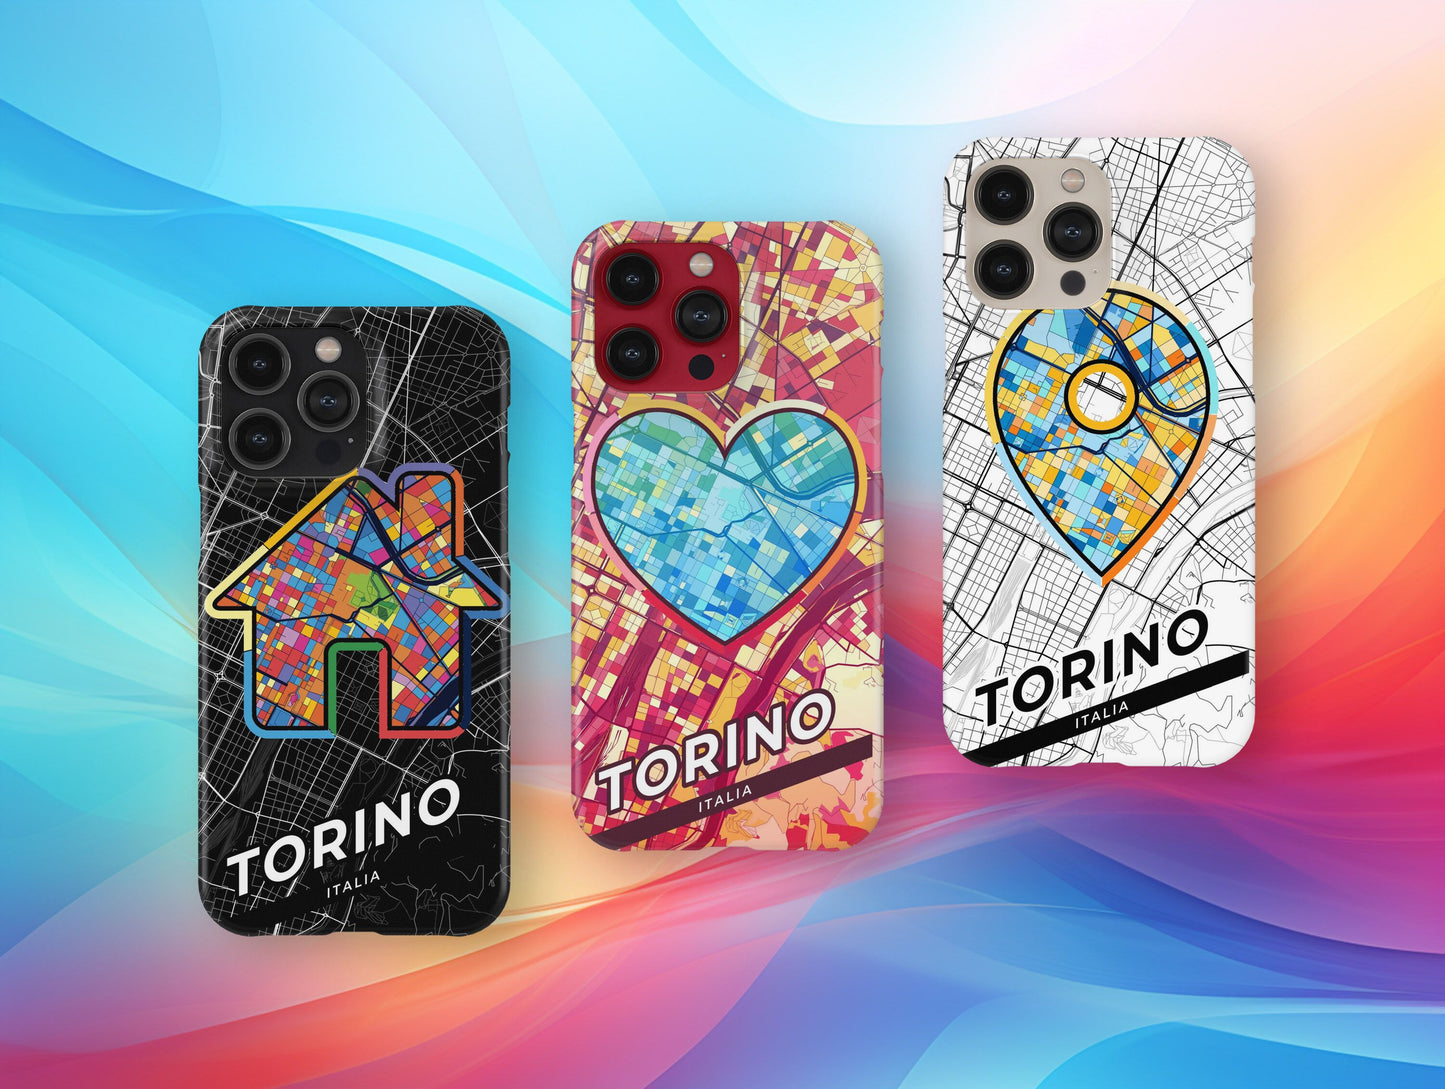 Turin Italy slim phone case with colorful icon